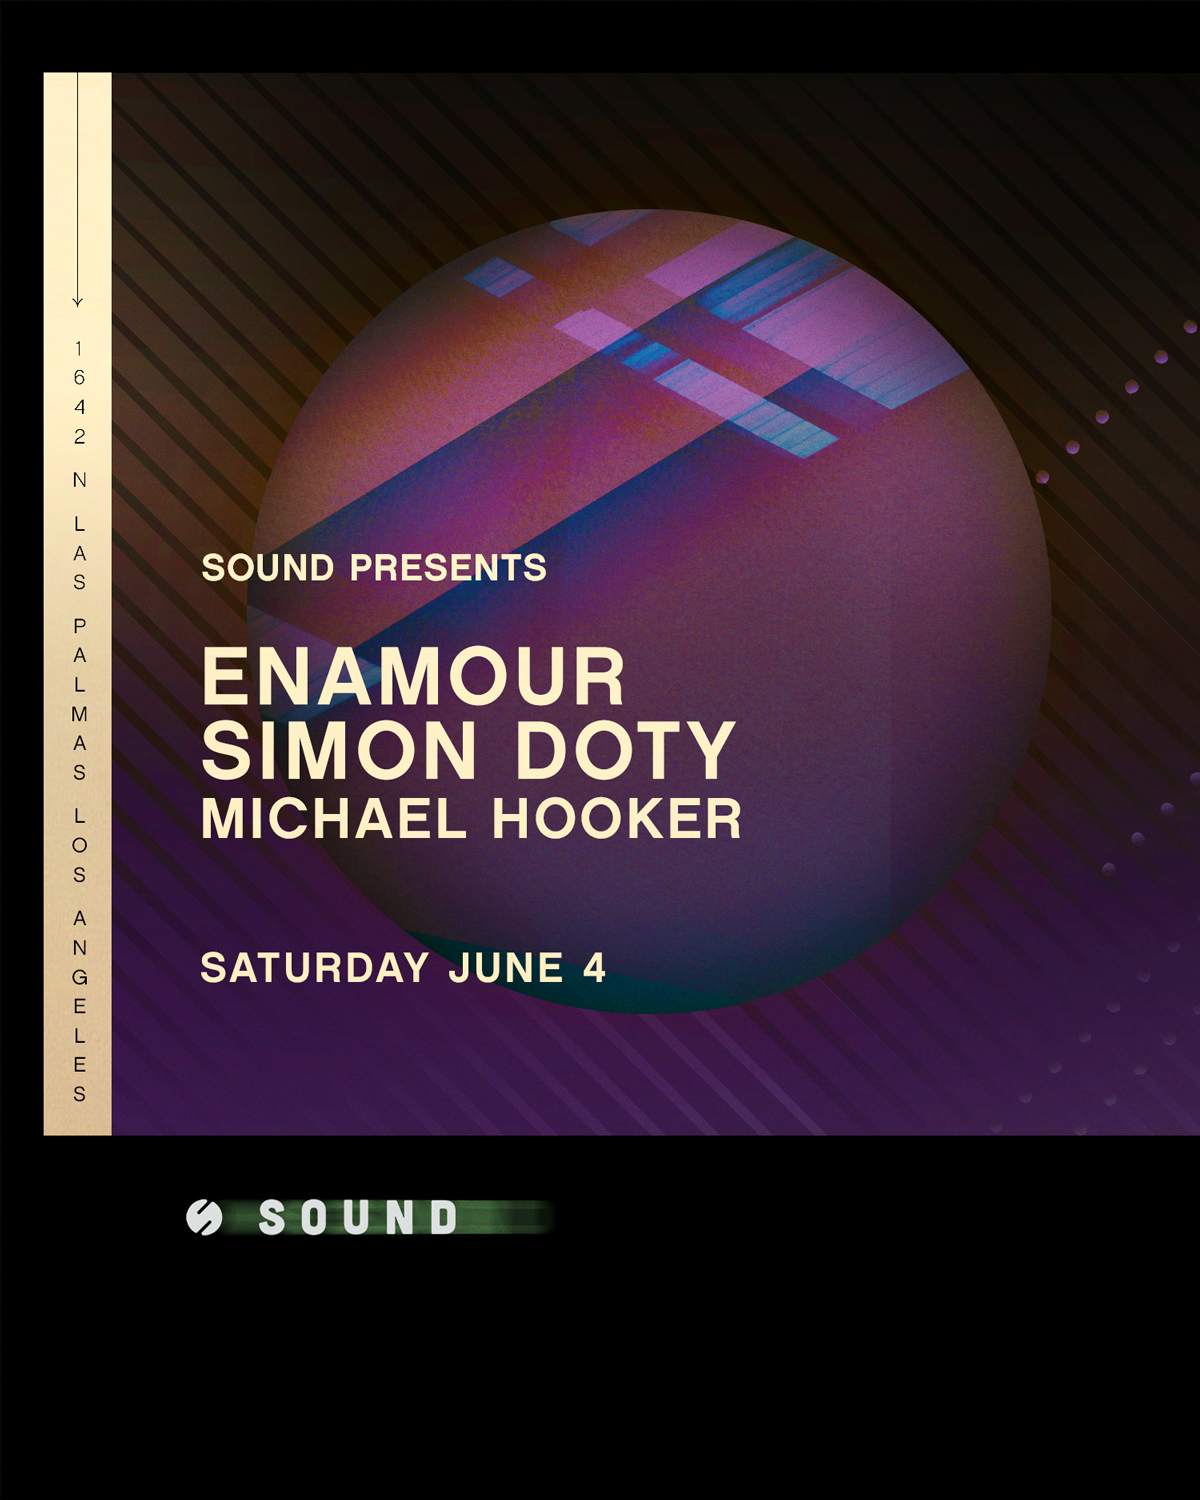 Sound presents Enamour and Simon Doty with support by Michael Hooker - フライヤー表